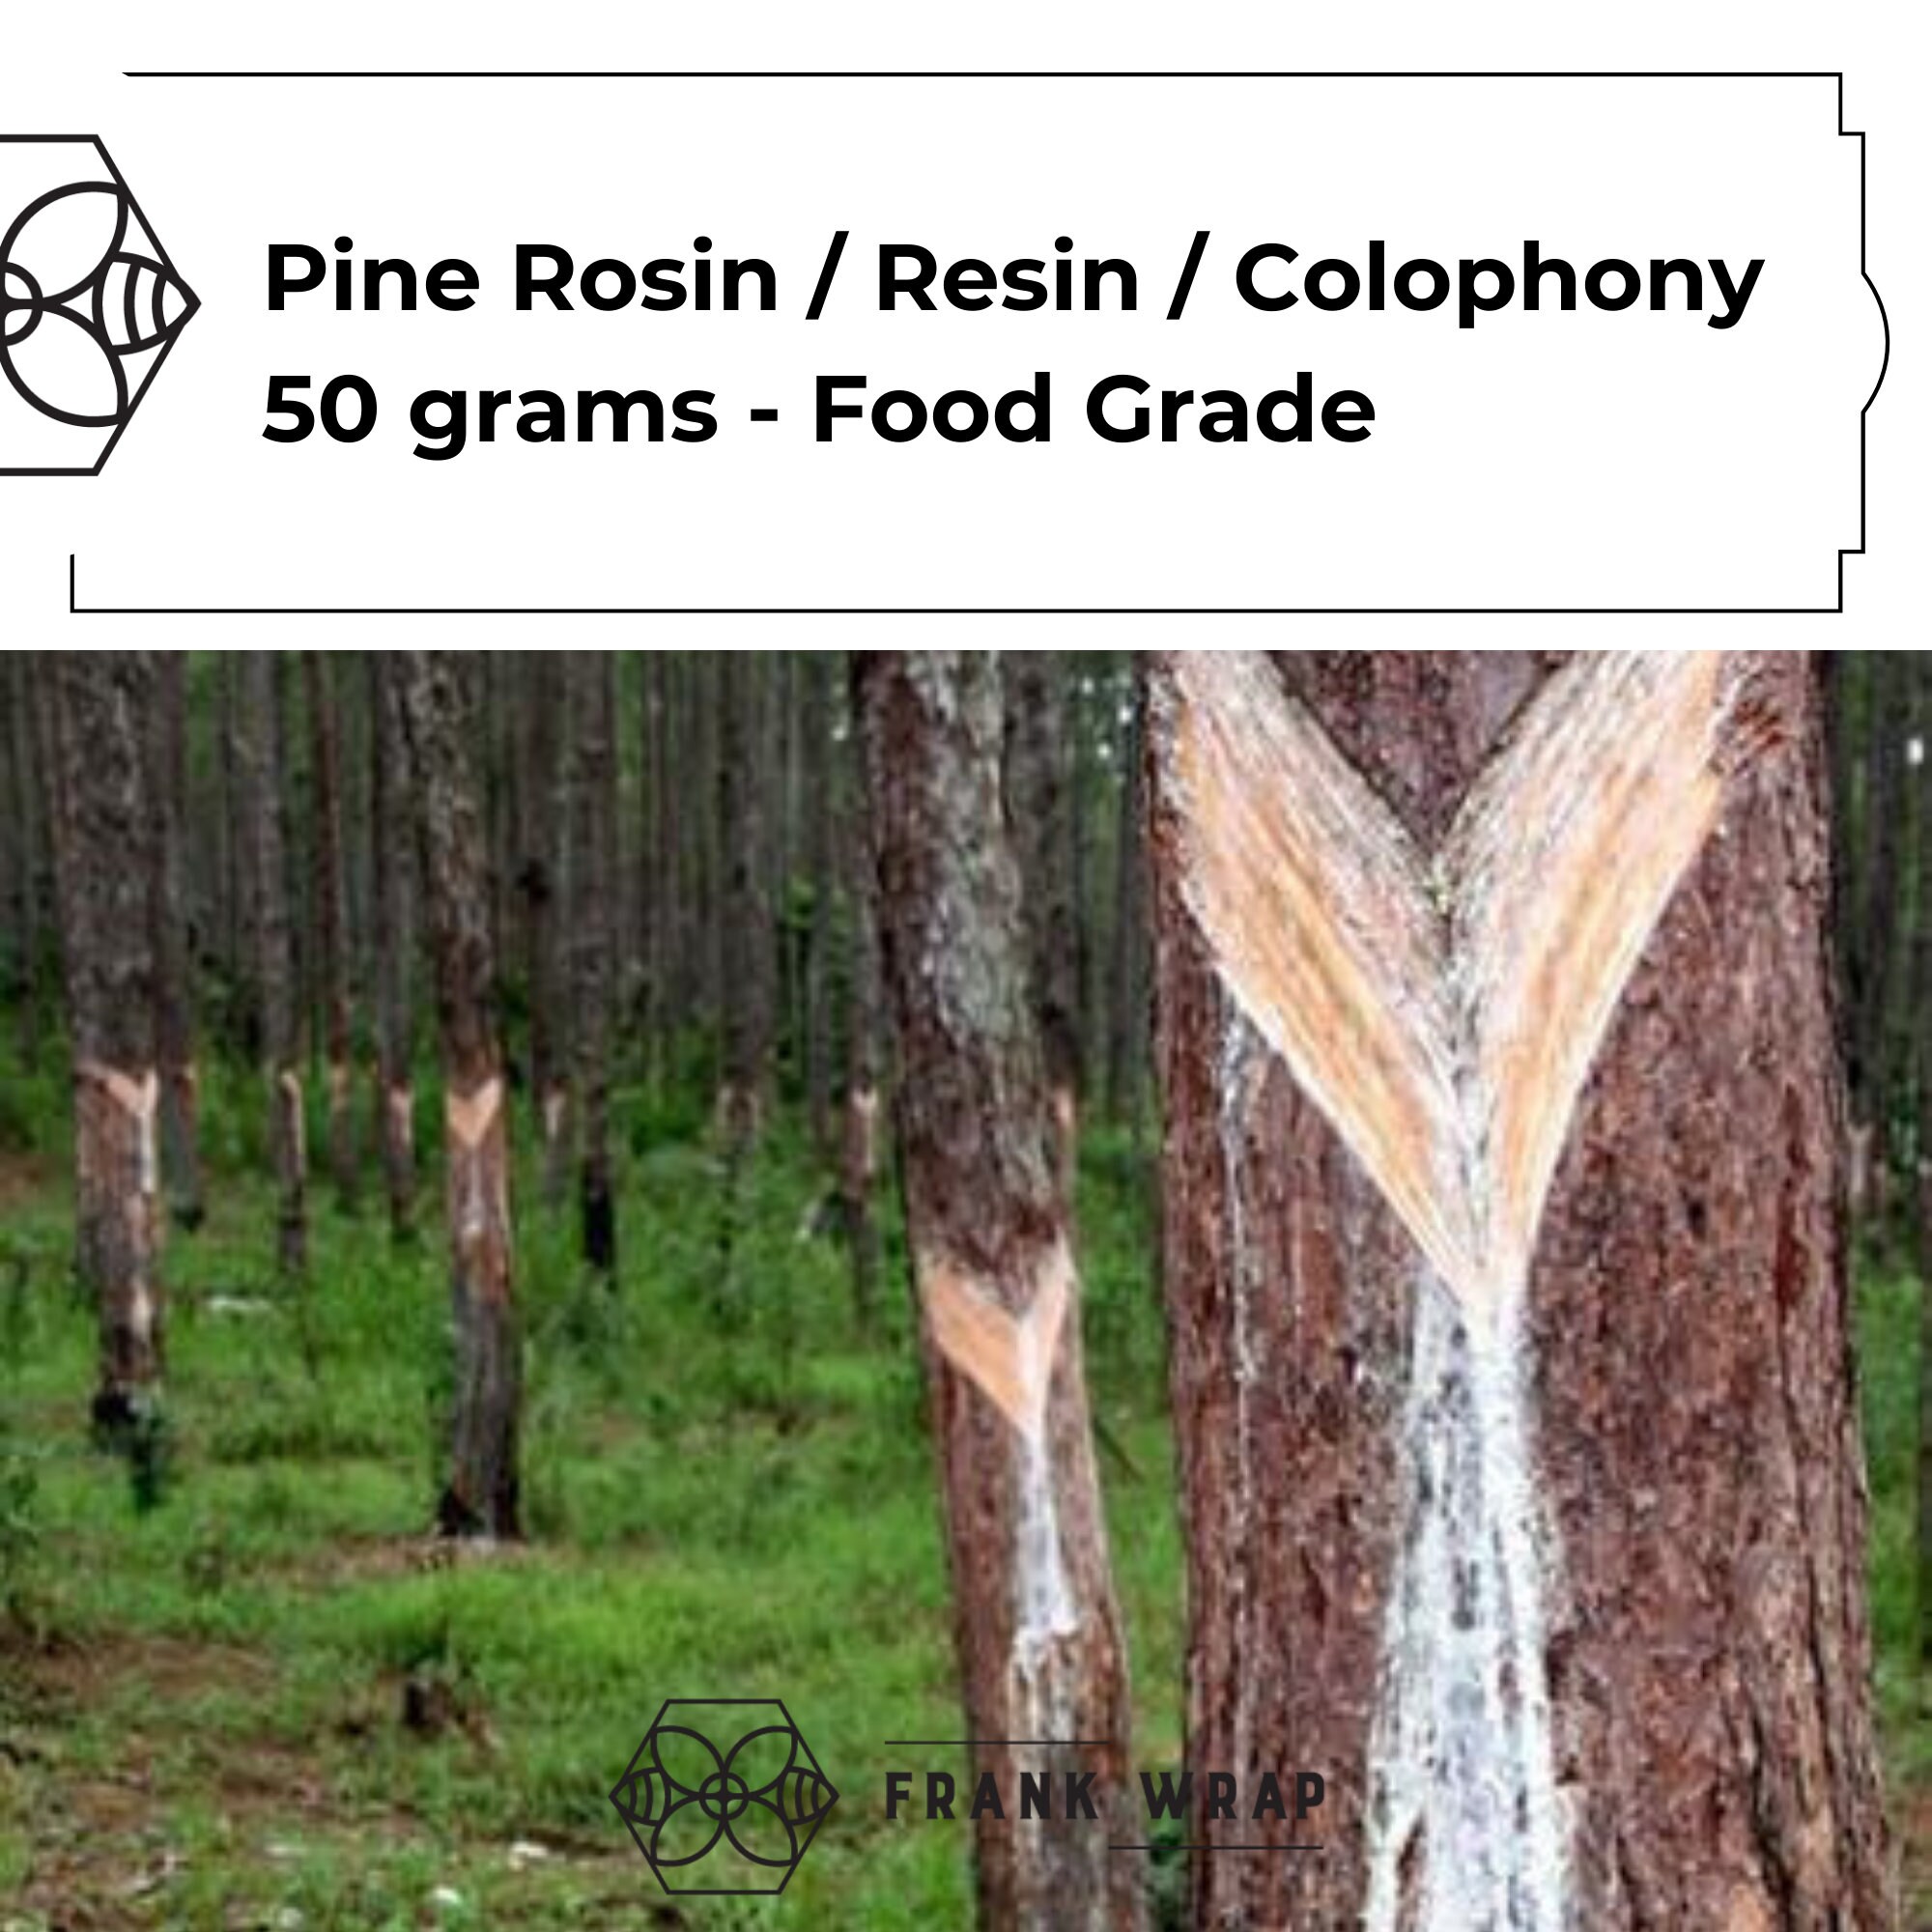 NATURAL PINE ROSIN, Gum Resin, Colony (nuggets), Colophony - 1000g-5000g  (1-5kg)